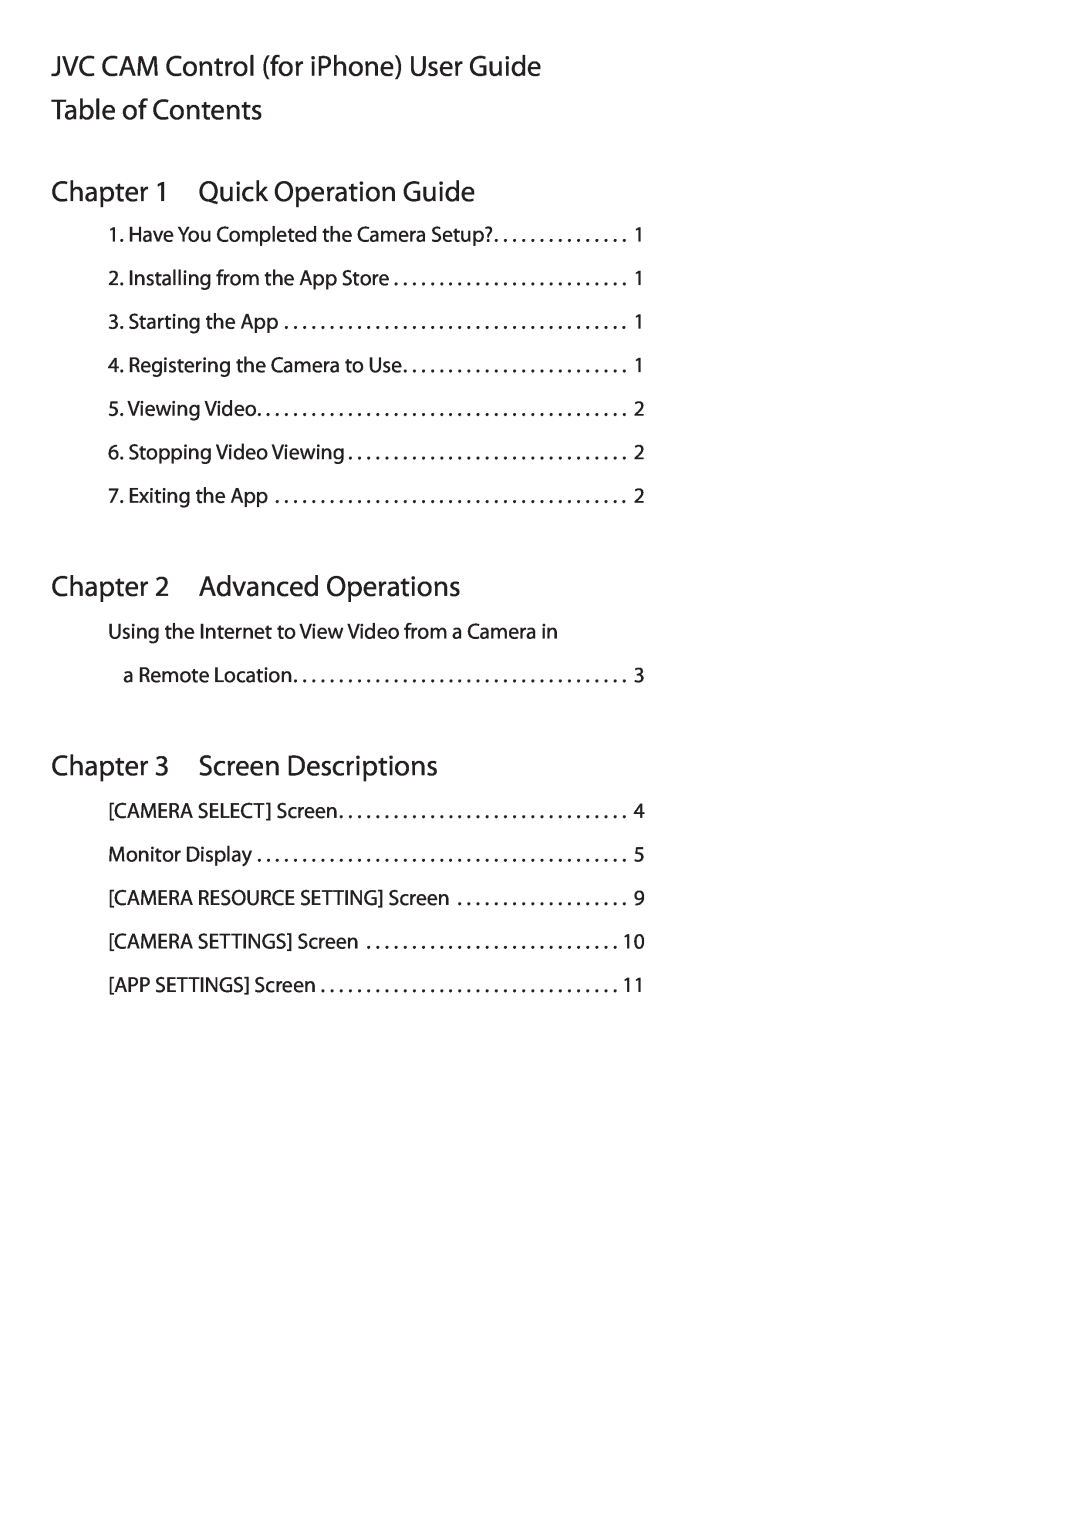 JVC GV-LS1, GV-LS2 JVC CAM Control for iPhone User Guide Table of Contents, Quick Operation Guide, Advanced Operations 